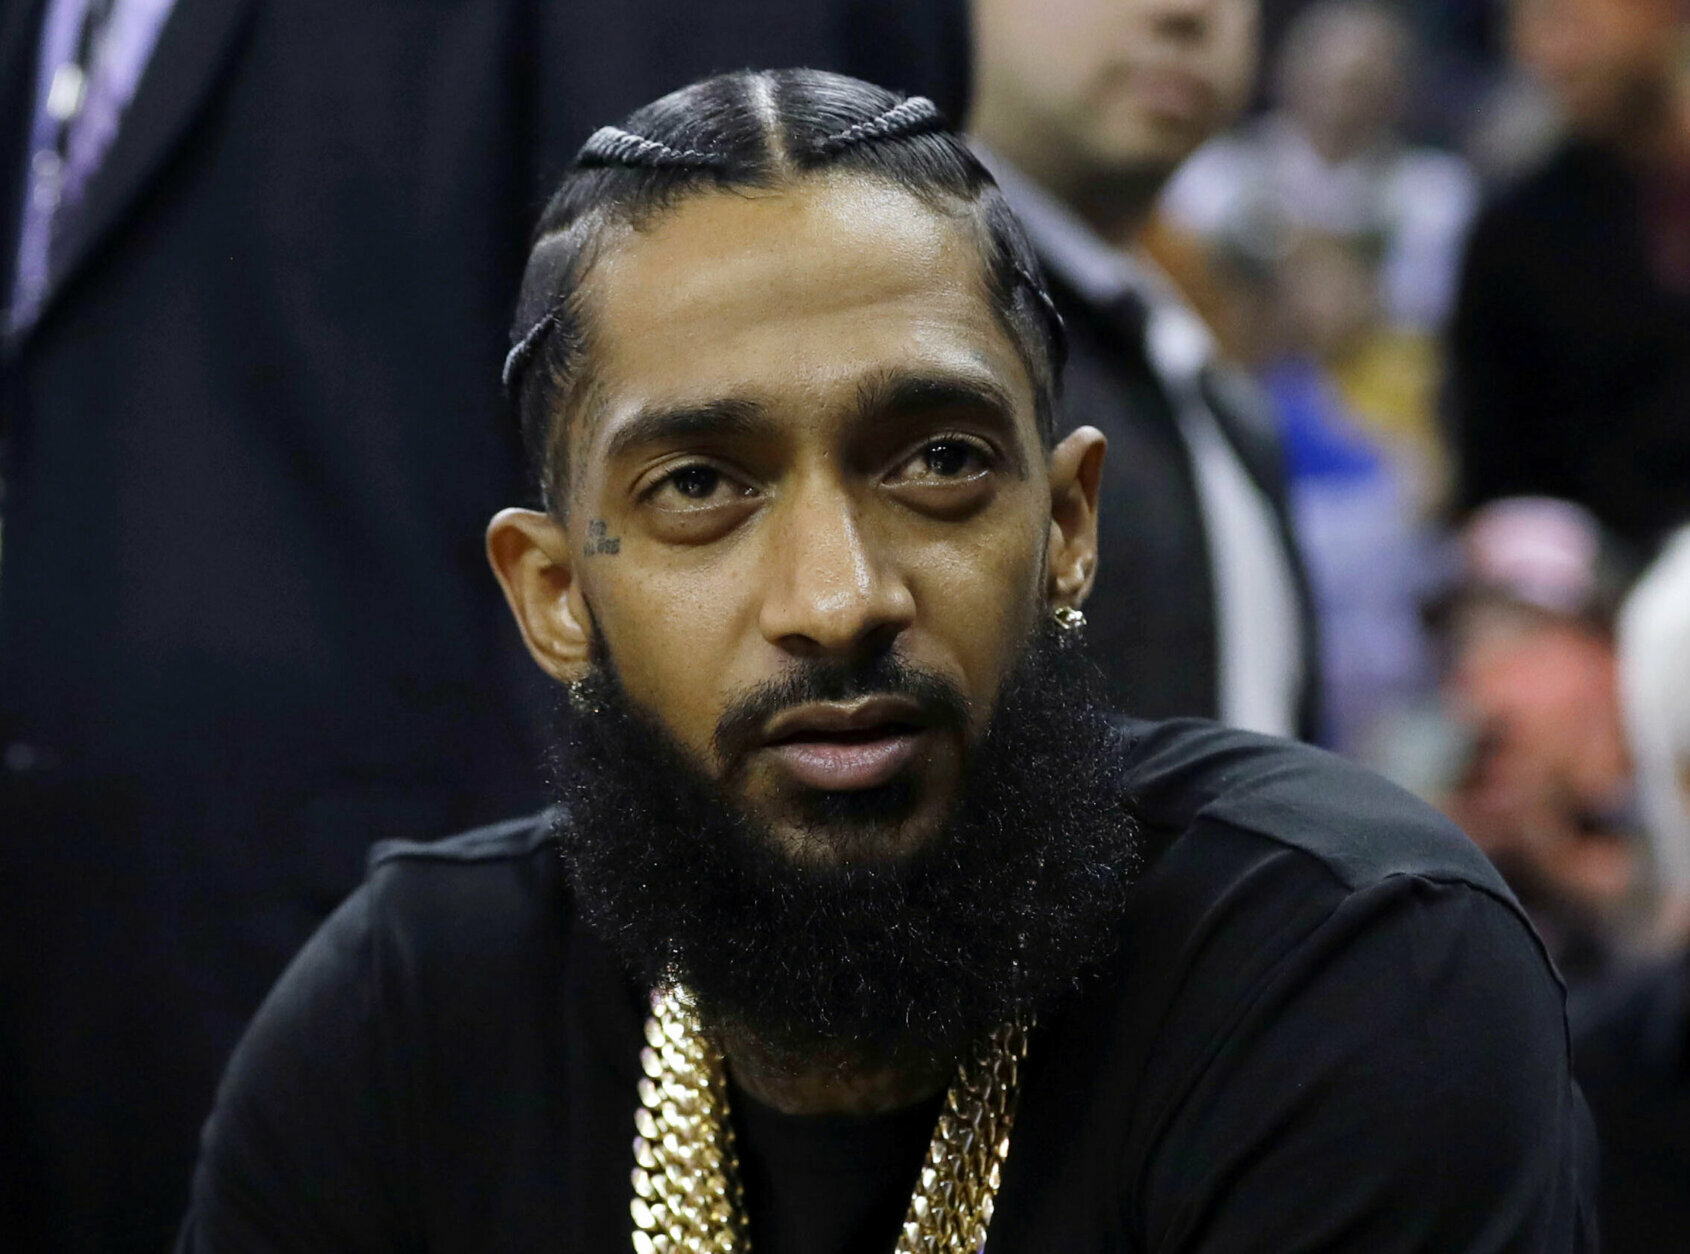 <p><strong><span class="w8qArf"> </span><span class="LrzXr kno-fv">March 31: Nipsey Hussle at age 33</span></strong></p>
